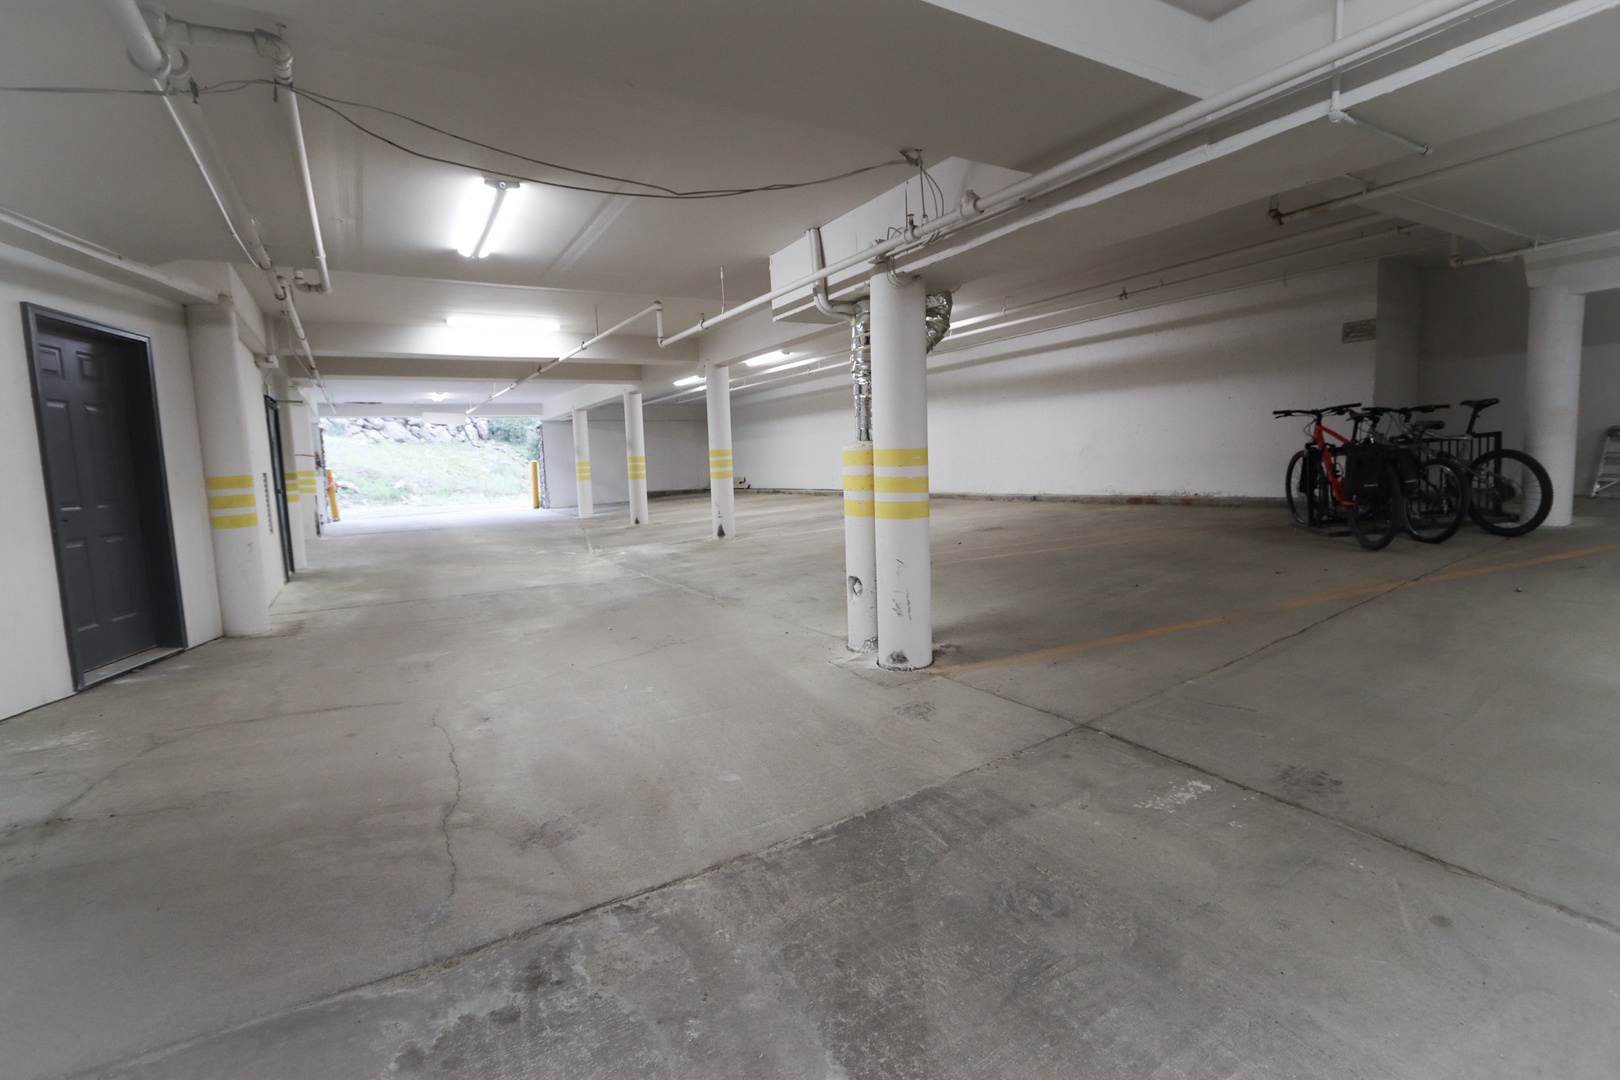 This condo offers parking for 2 vehicles in the parking garage